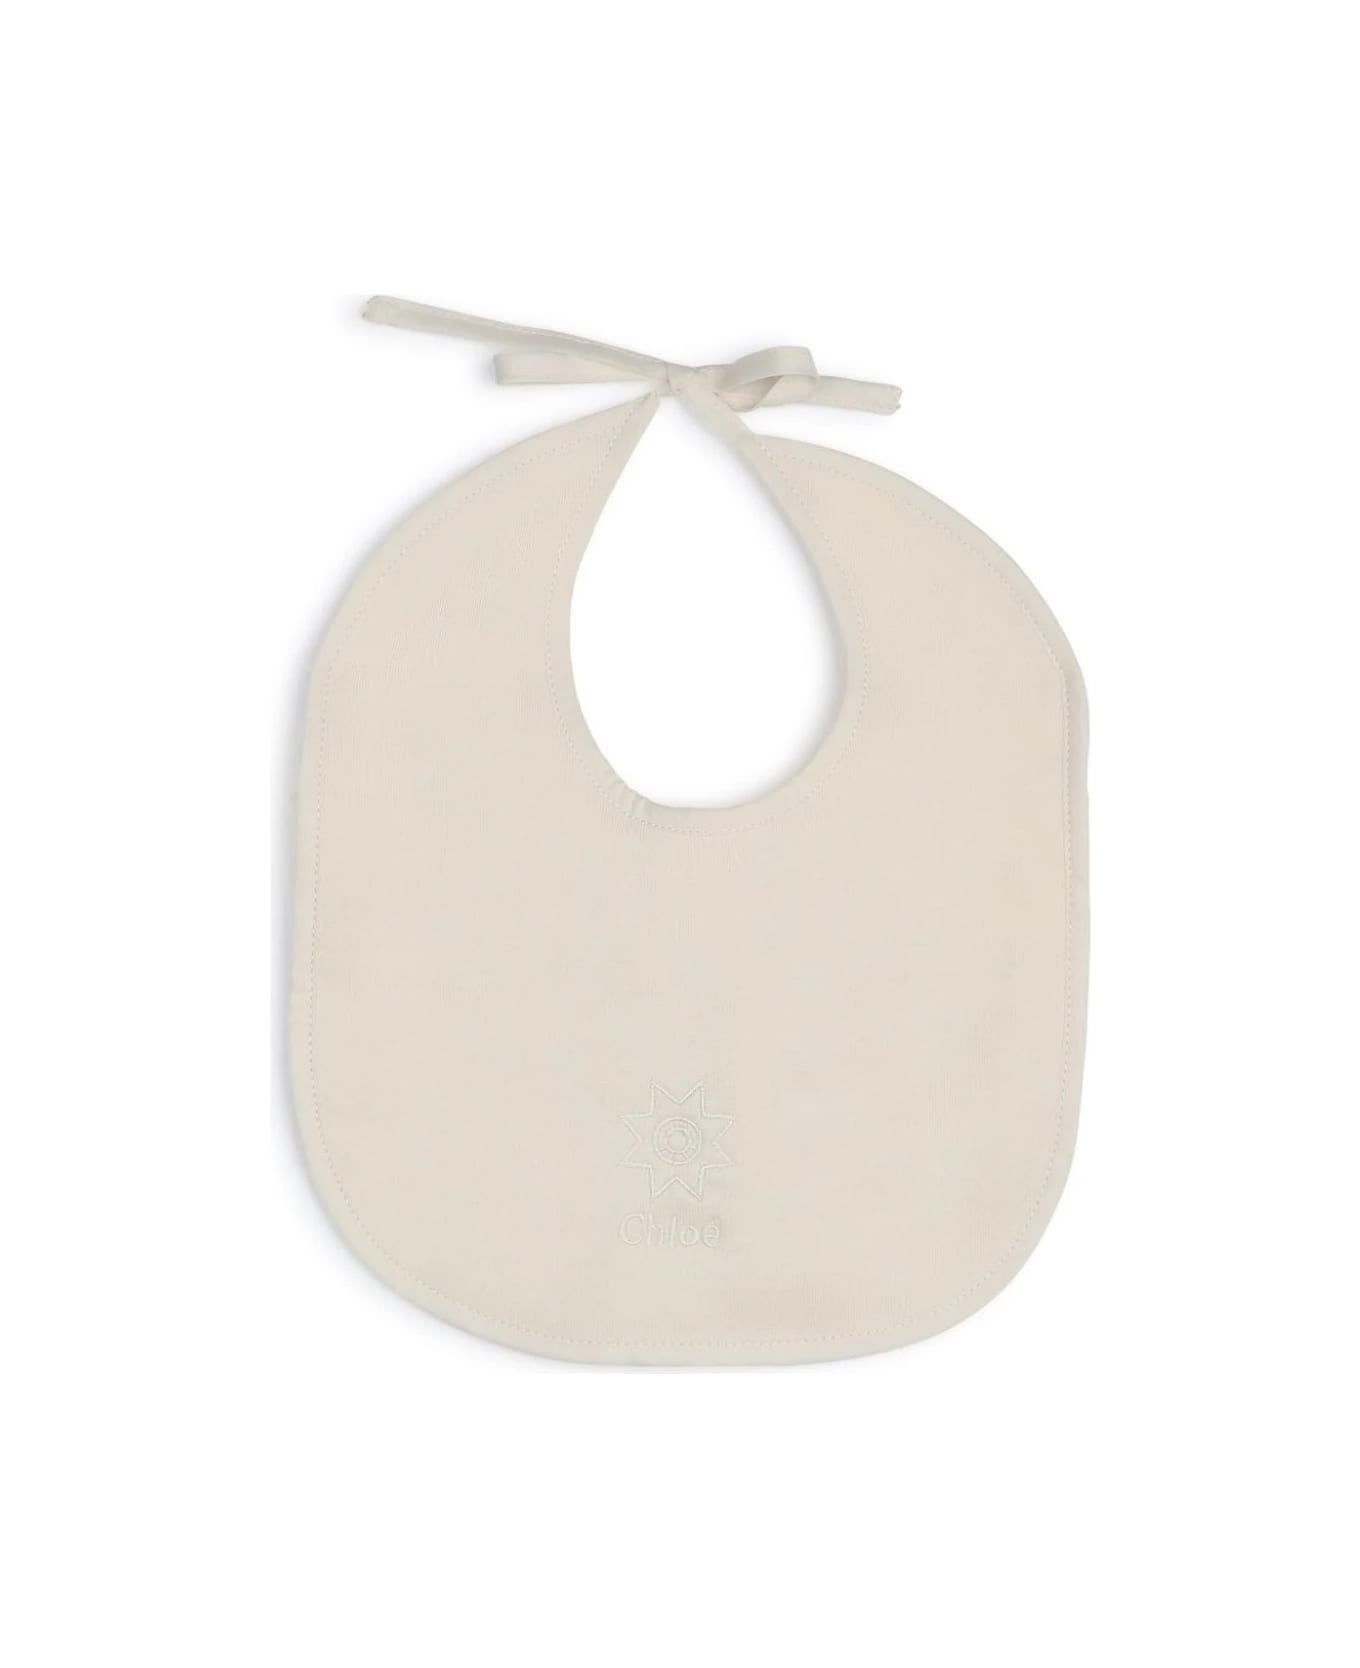 Chloé Gift Set With Playsuit And Bibs - White トップス